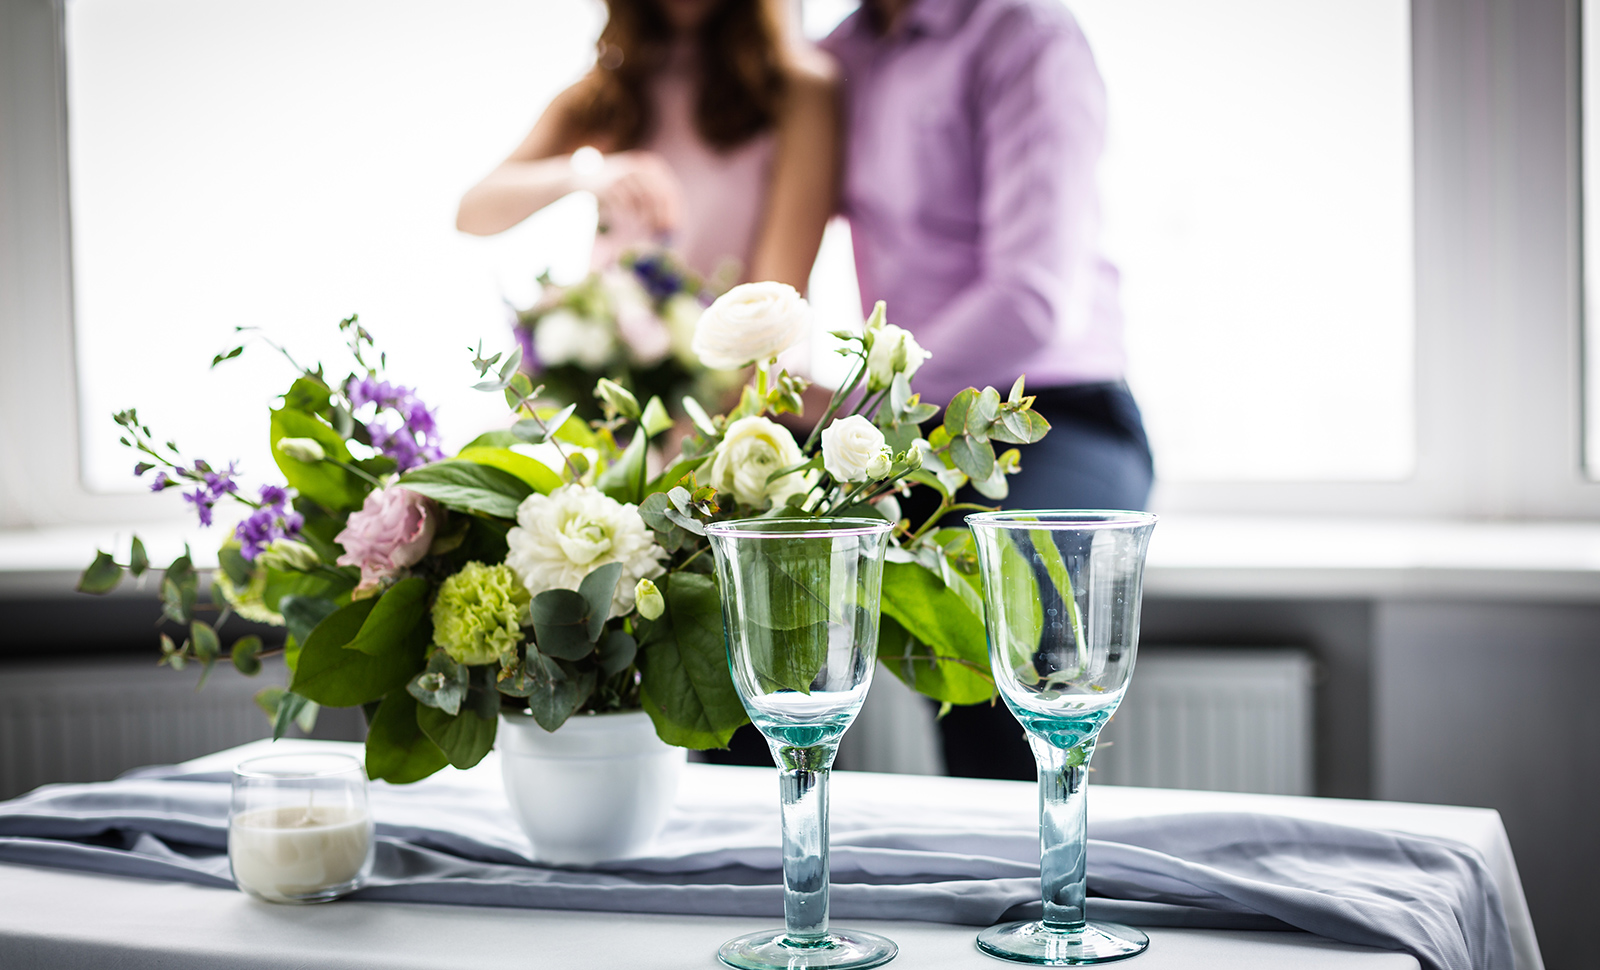 WHAT'S-THE-DEAL-WITH-REHEARSAL-DINNERS-